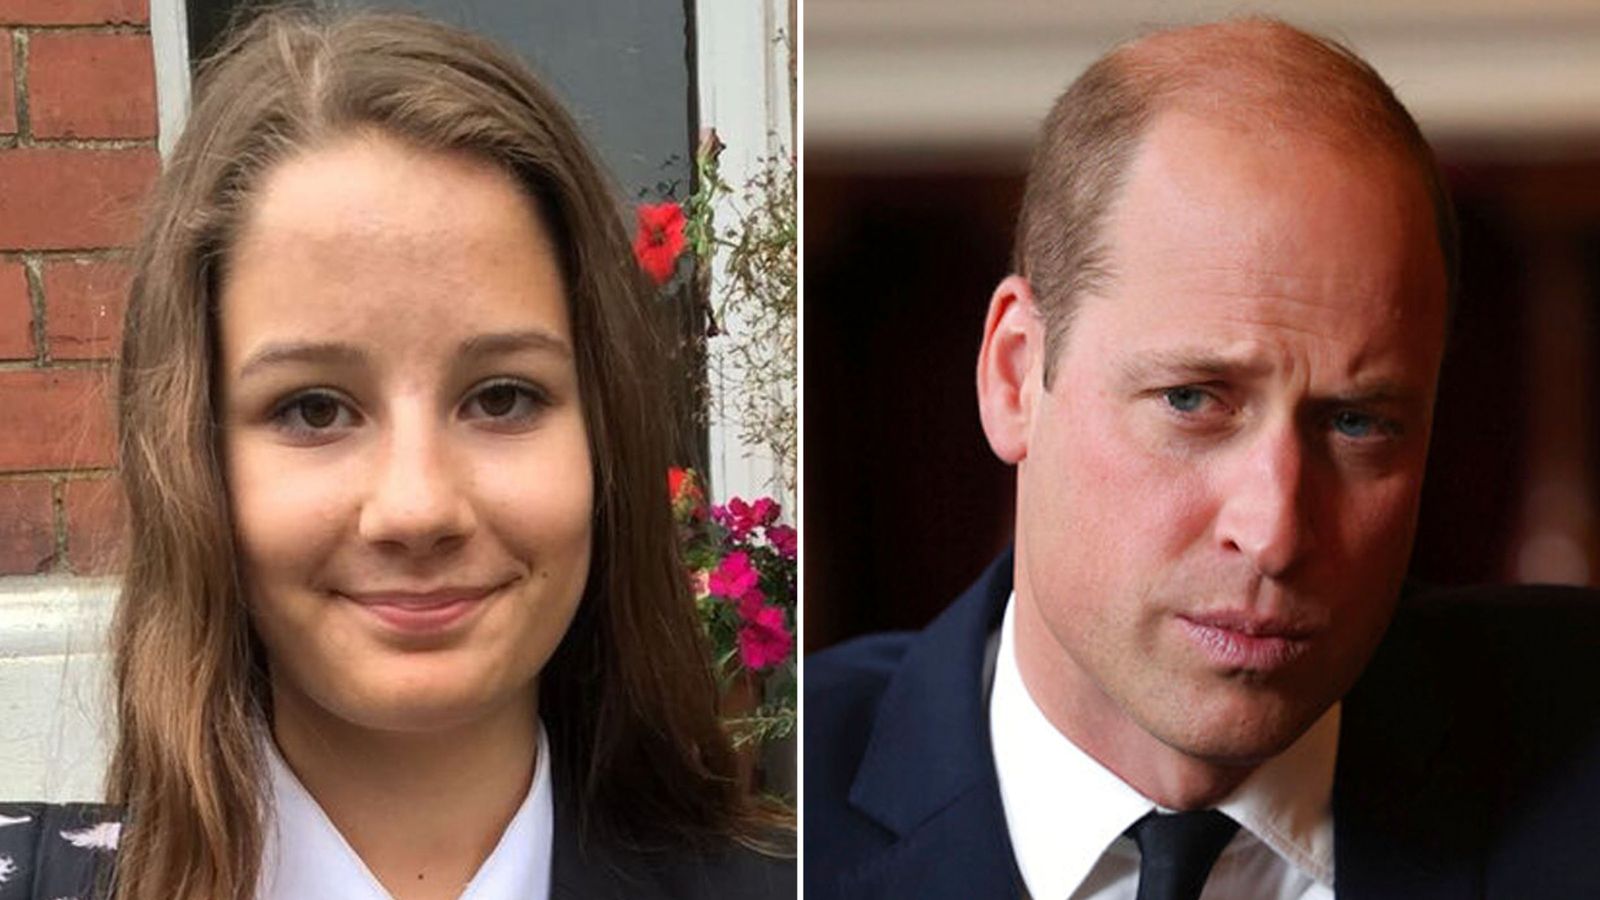 Prince William calls for improved online safety after coroner’s ruling in Molly Russell death